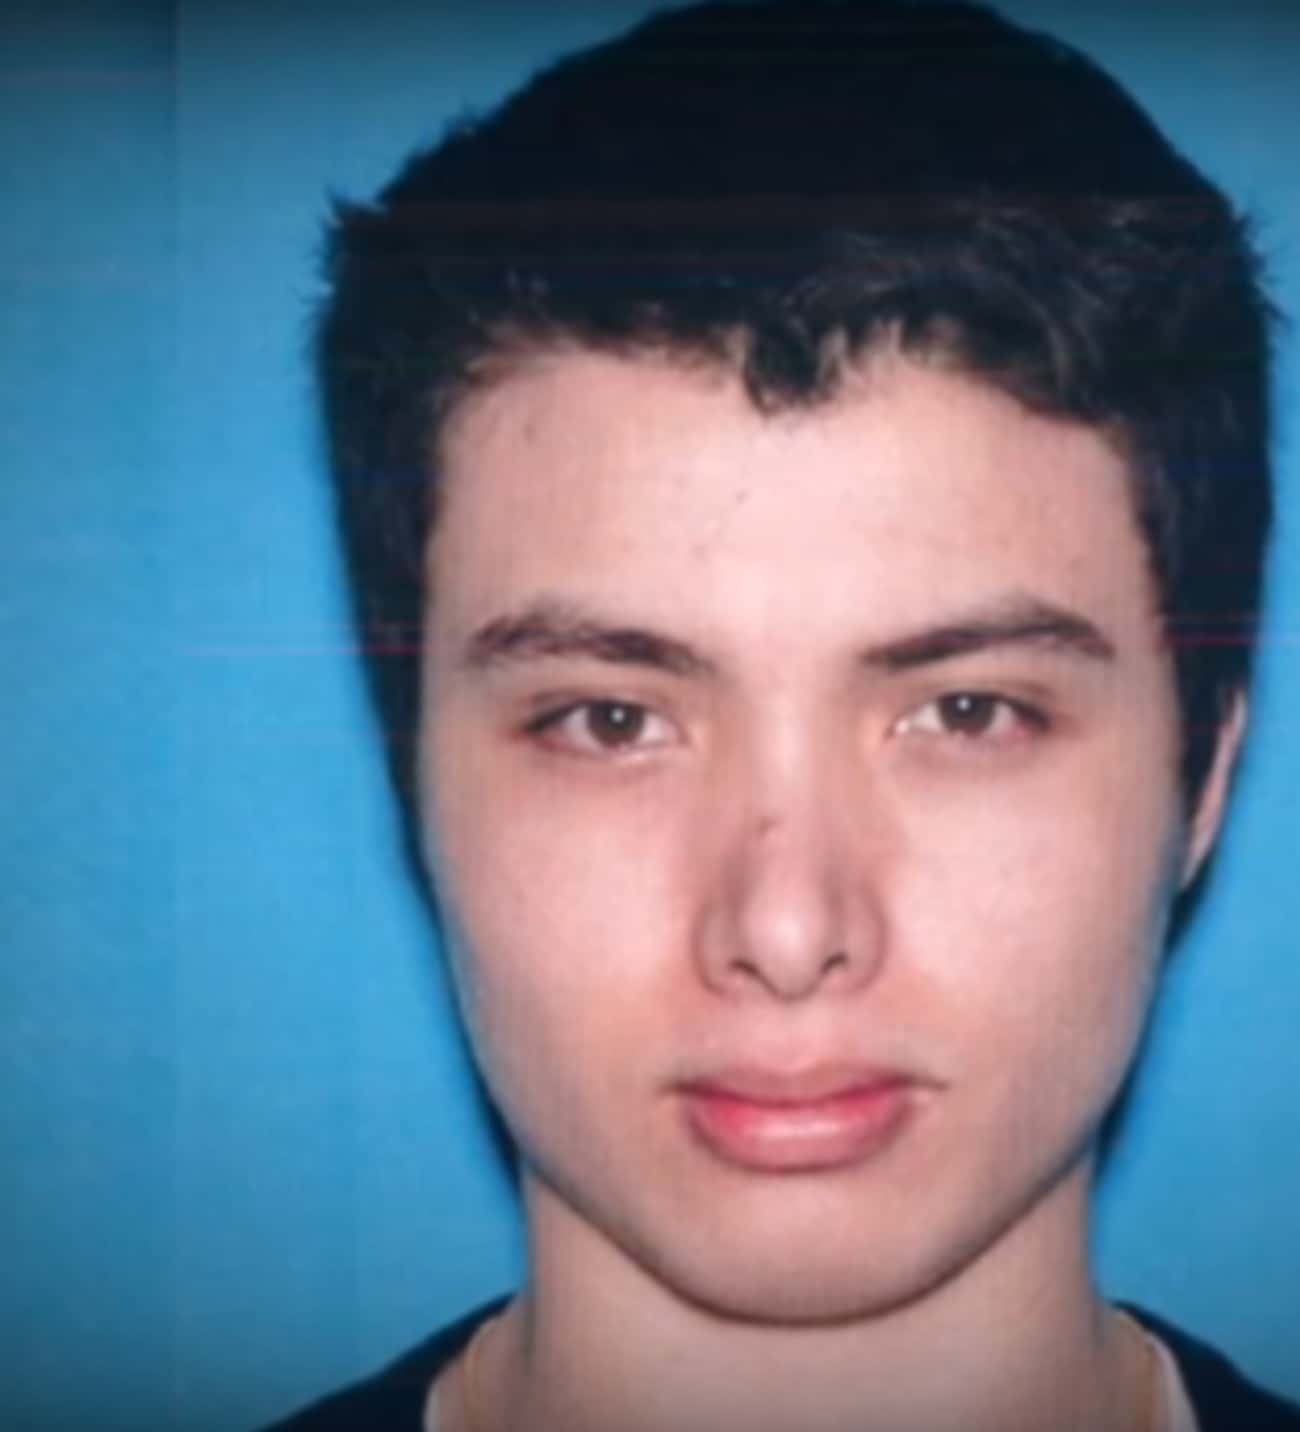 Elliot Rodger Killed Six People Before Turning A Gun On Himself